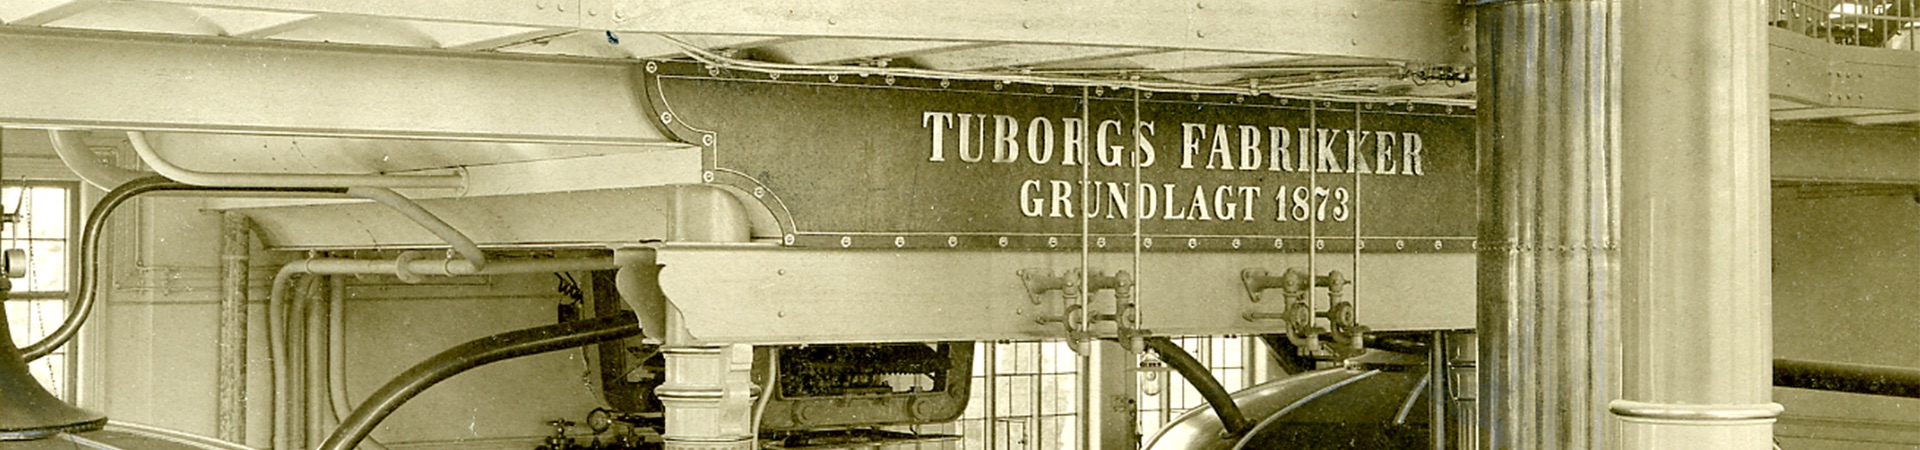 inside the Tuborg brewery facilities in 1953